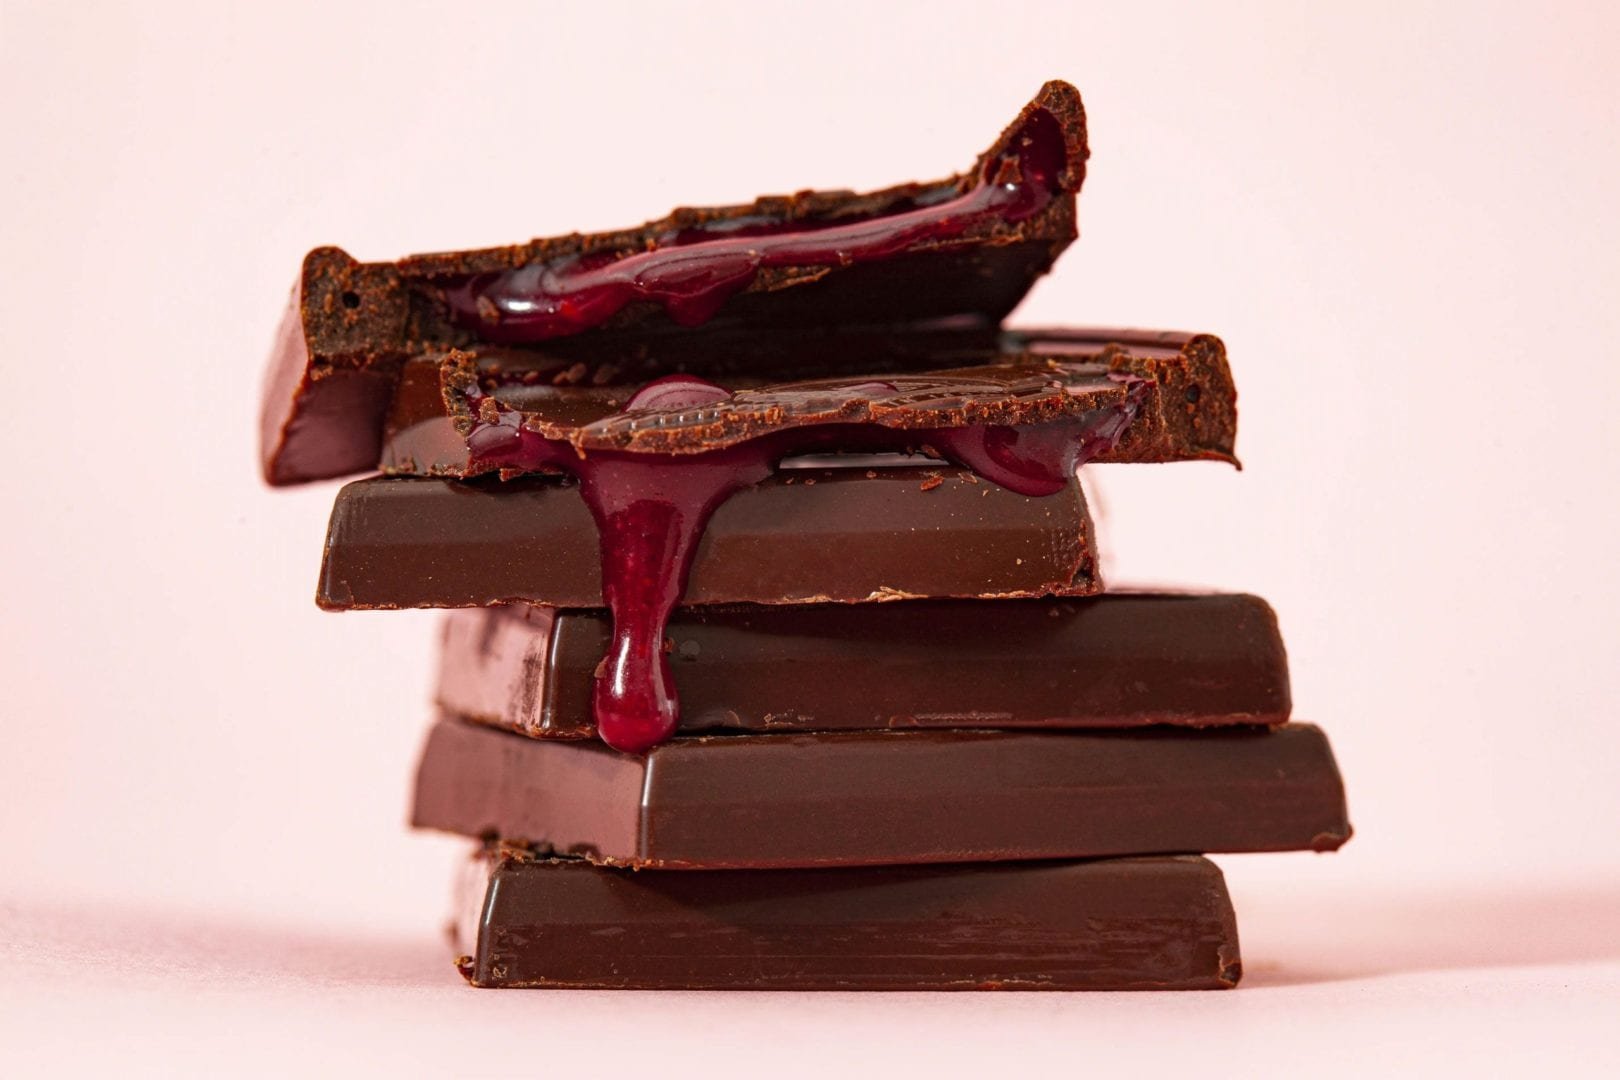 Is Chocolate A Superfood?